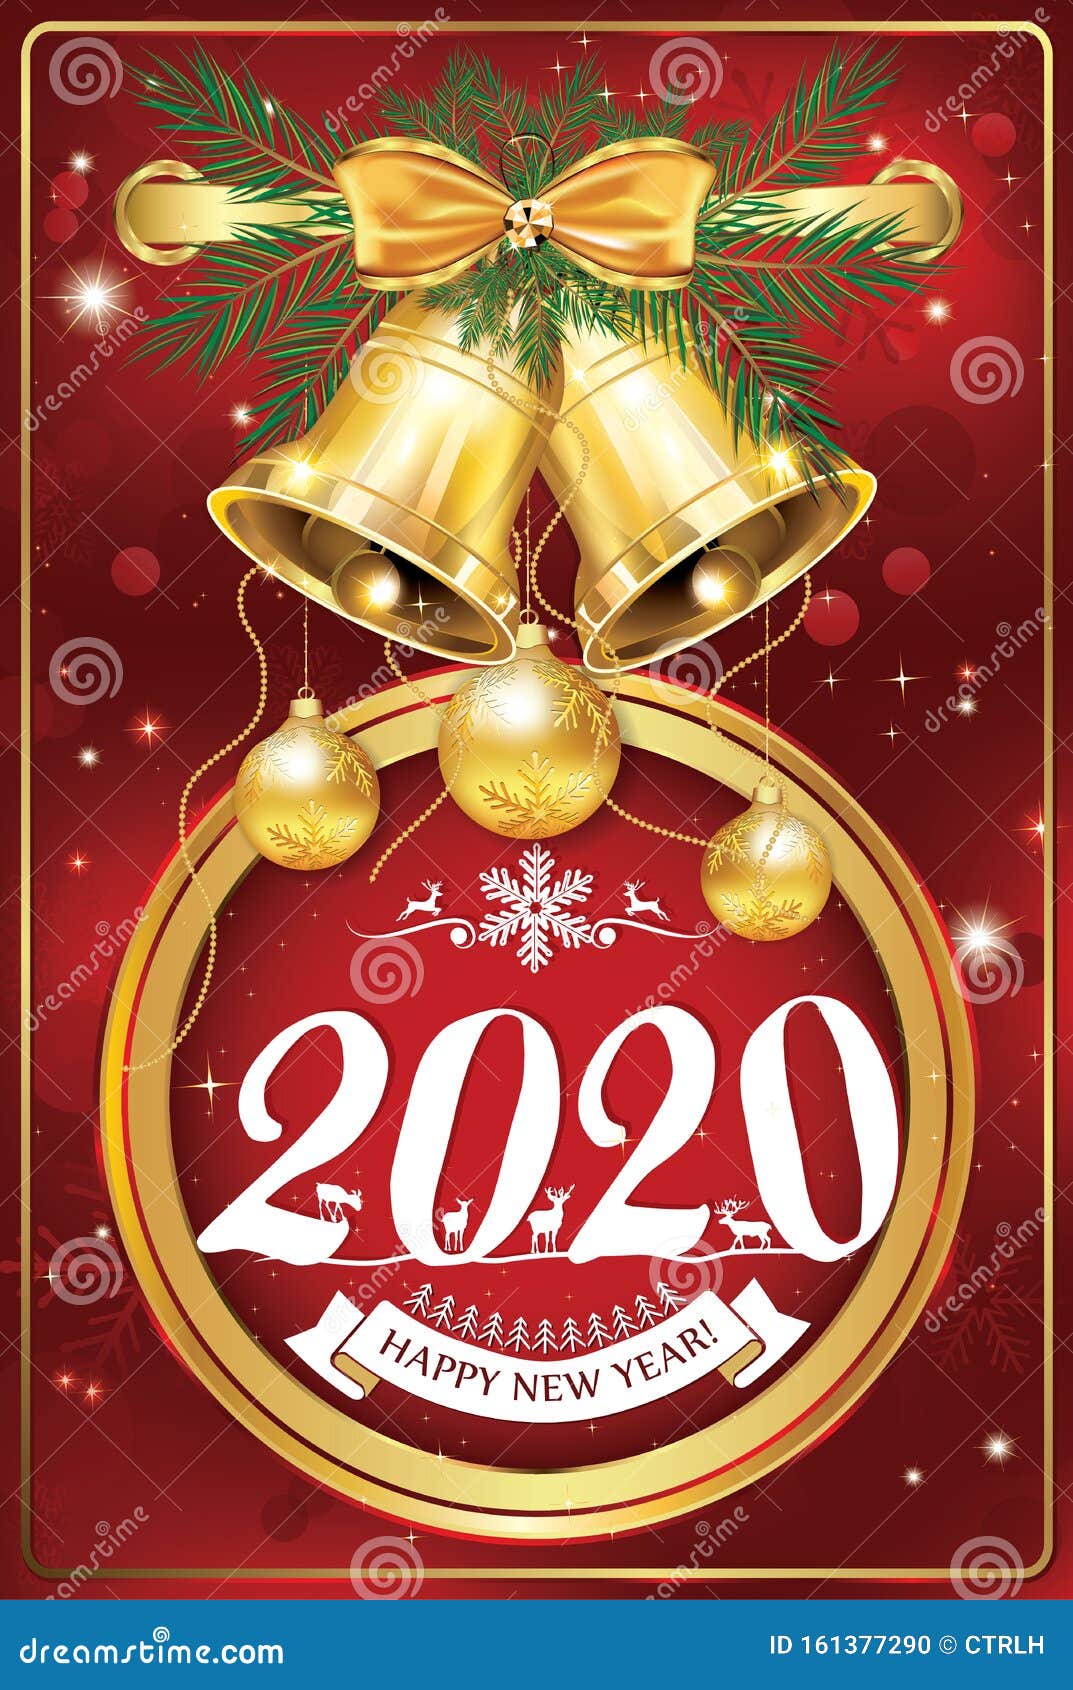 Happy New Year 2020 - Classic Greeting Card With Jingle Bells And Christmas Ribbon On A Red ...